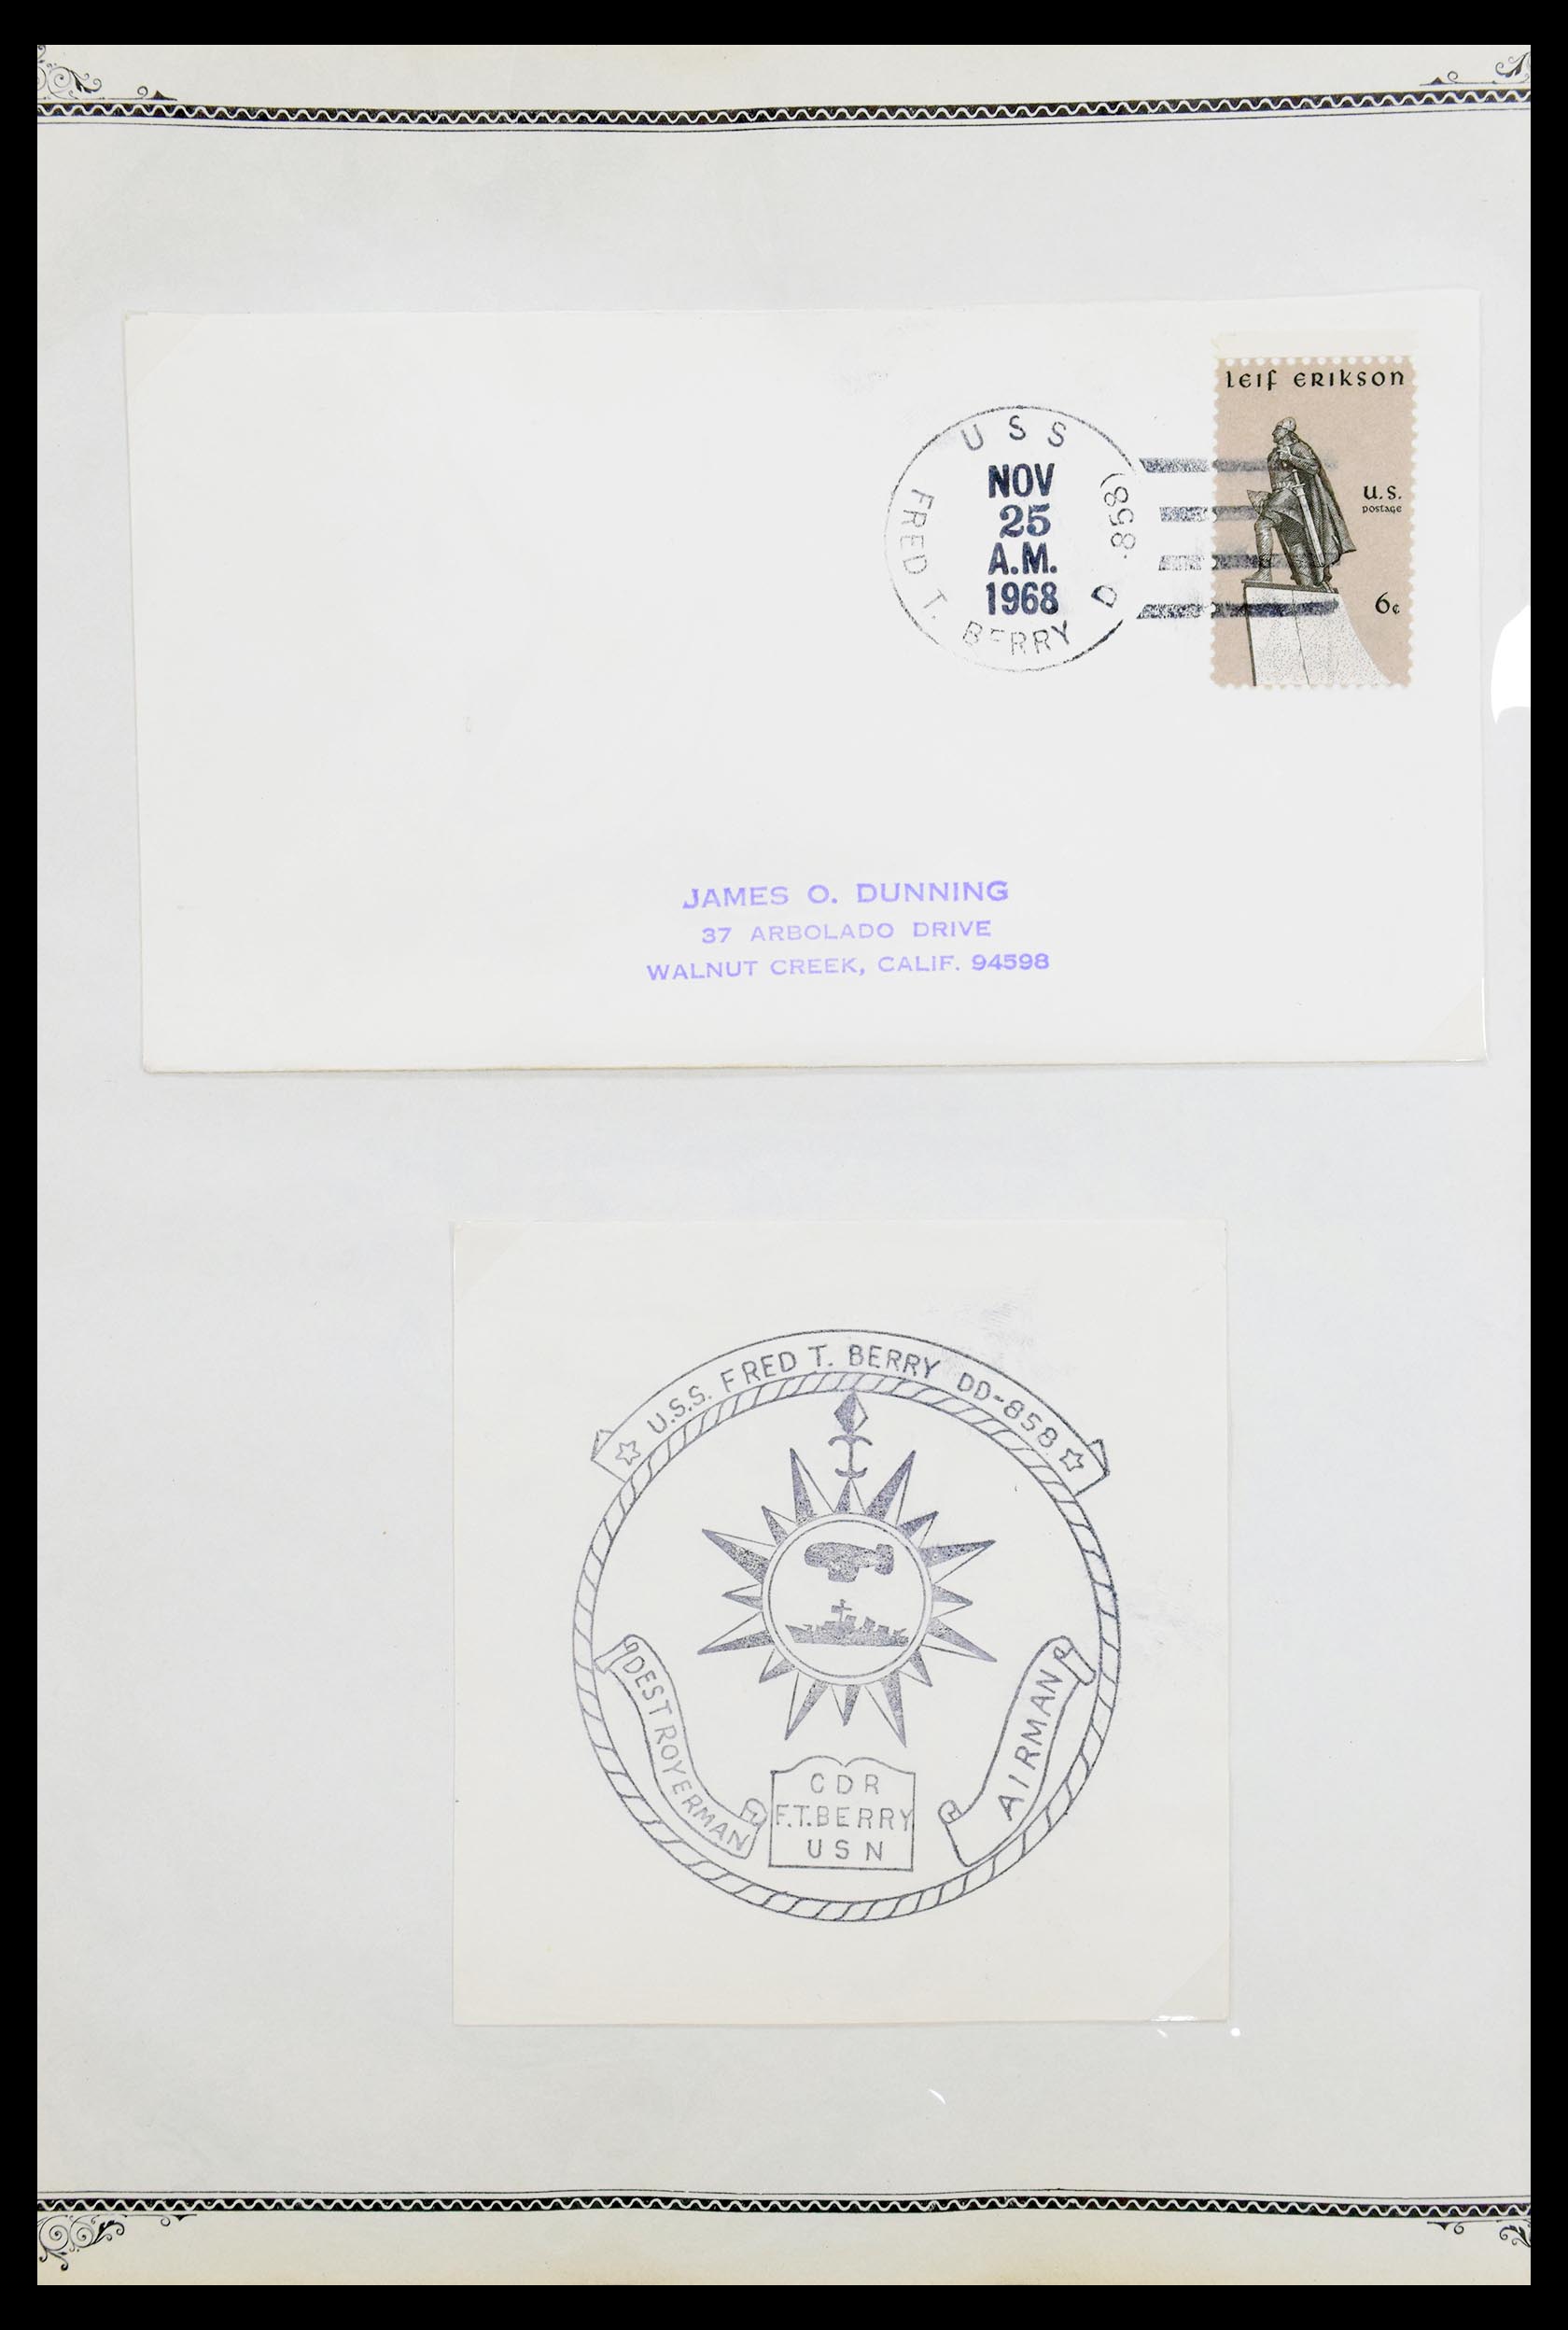 30341 059 - 30341 USA naval cover collection 1930-1970.